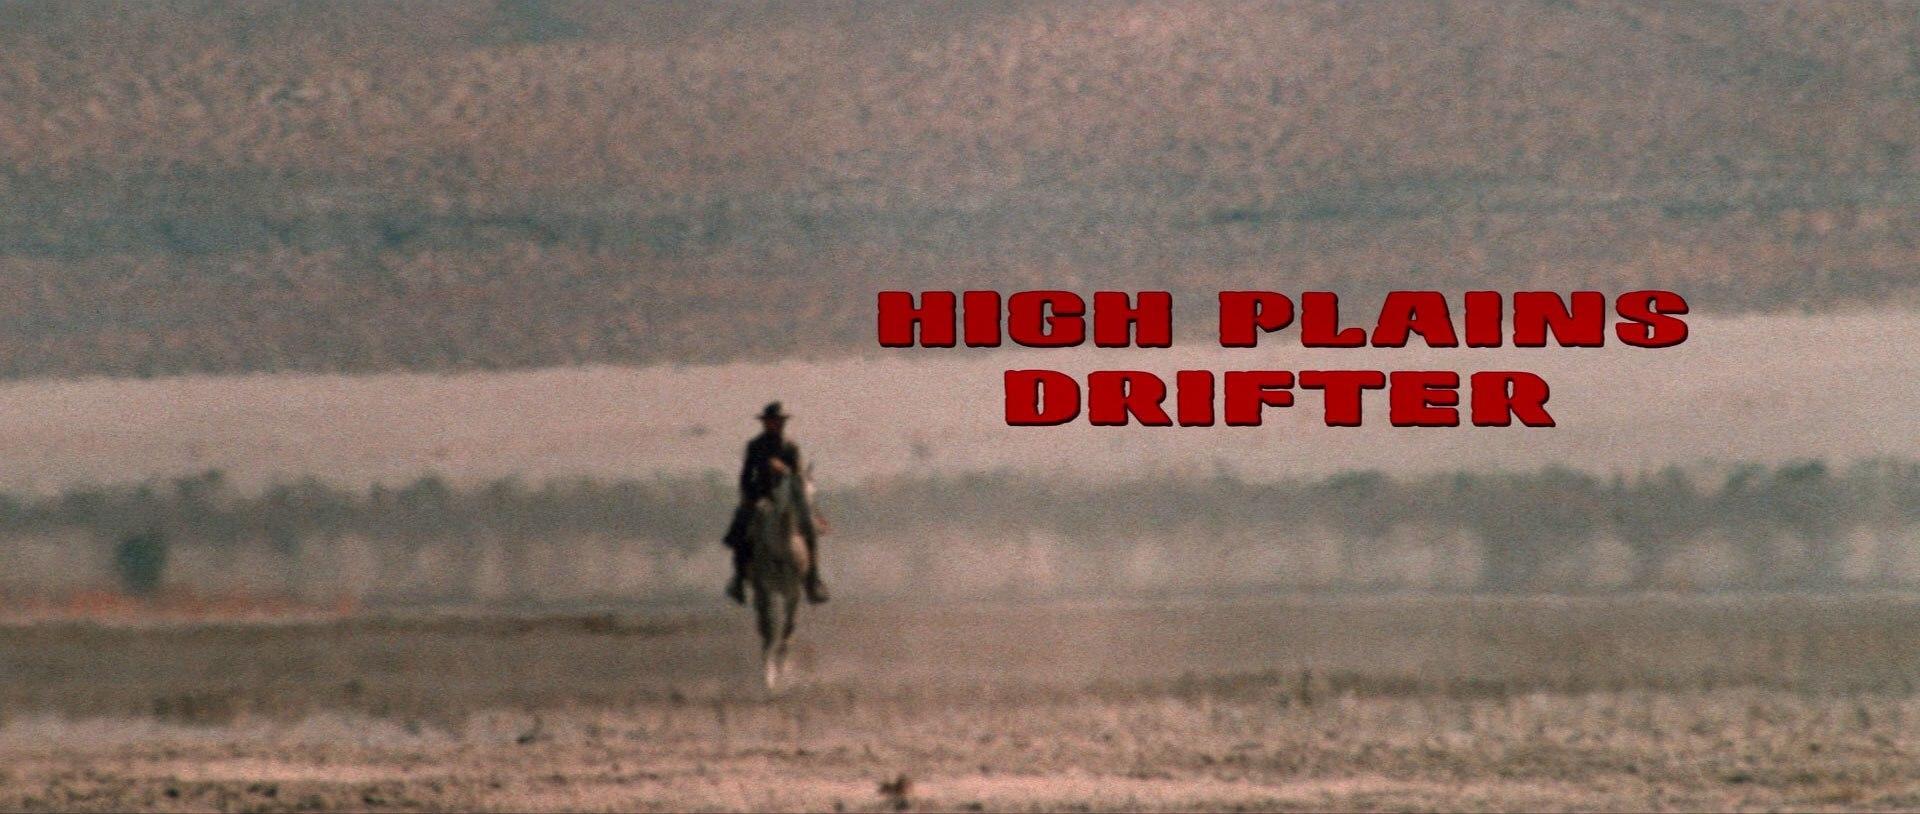 36-facts-about-the-movie-high-plains-drifter